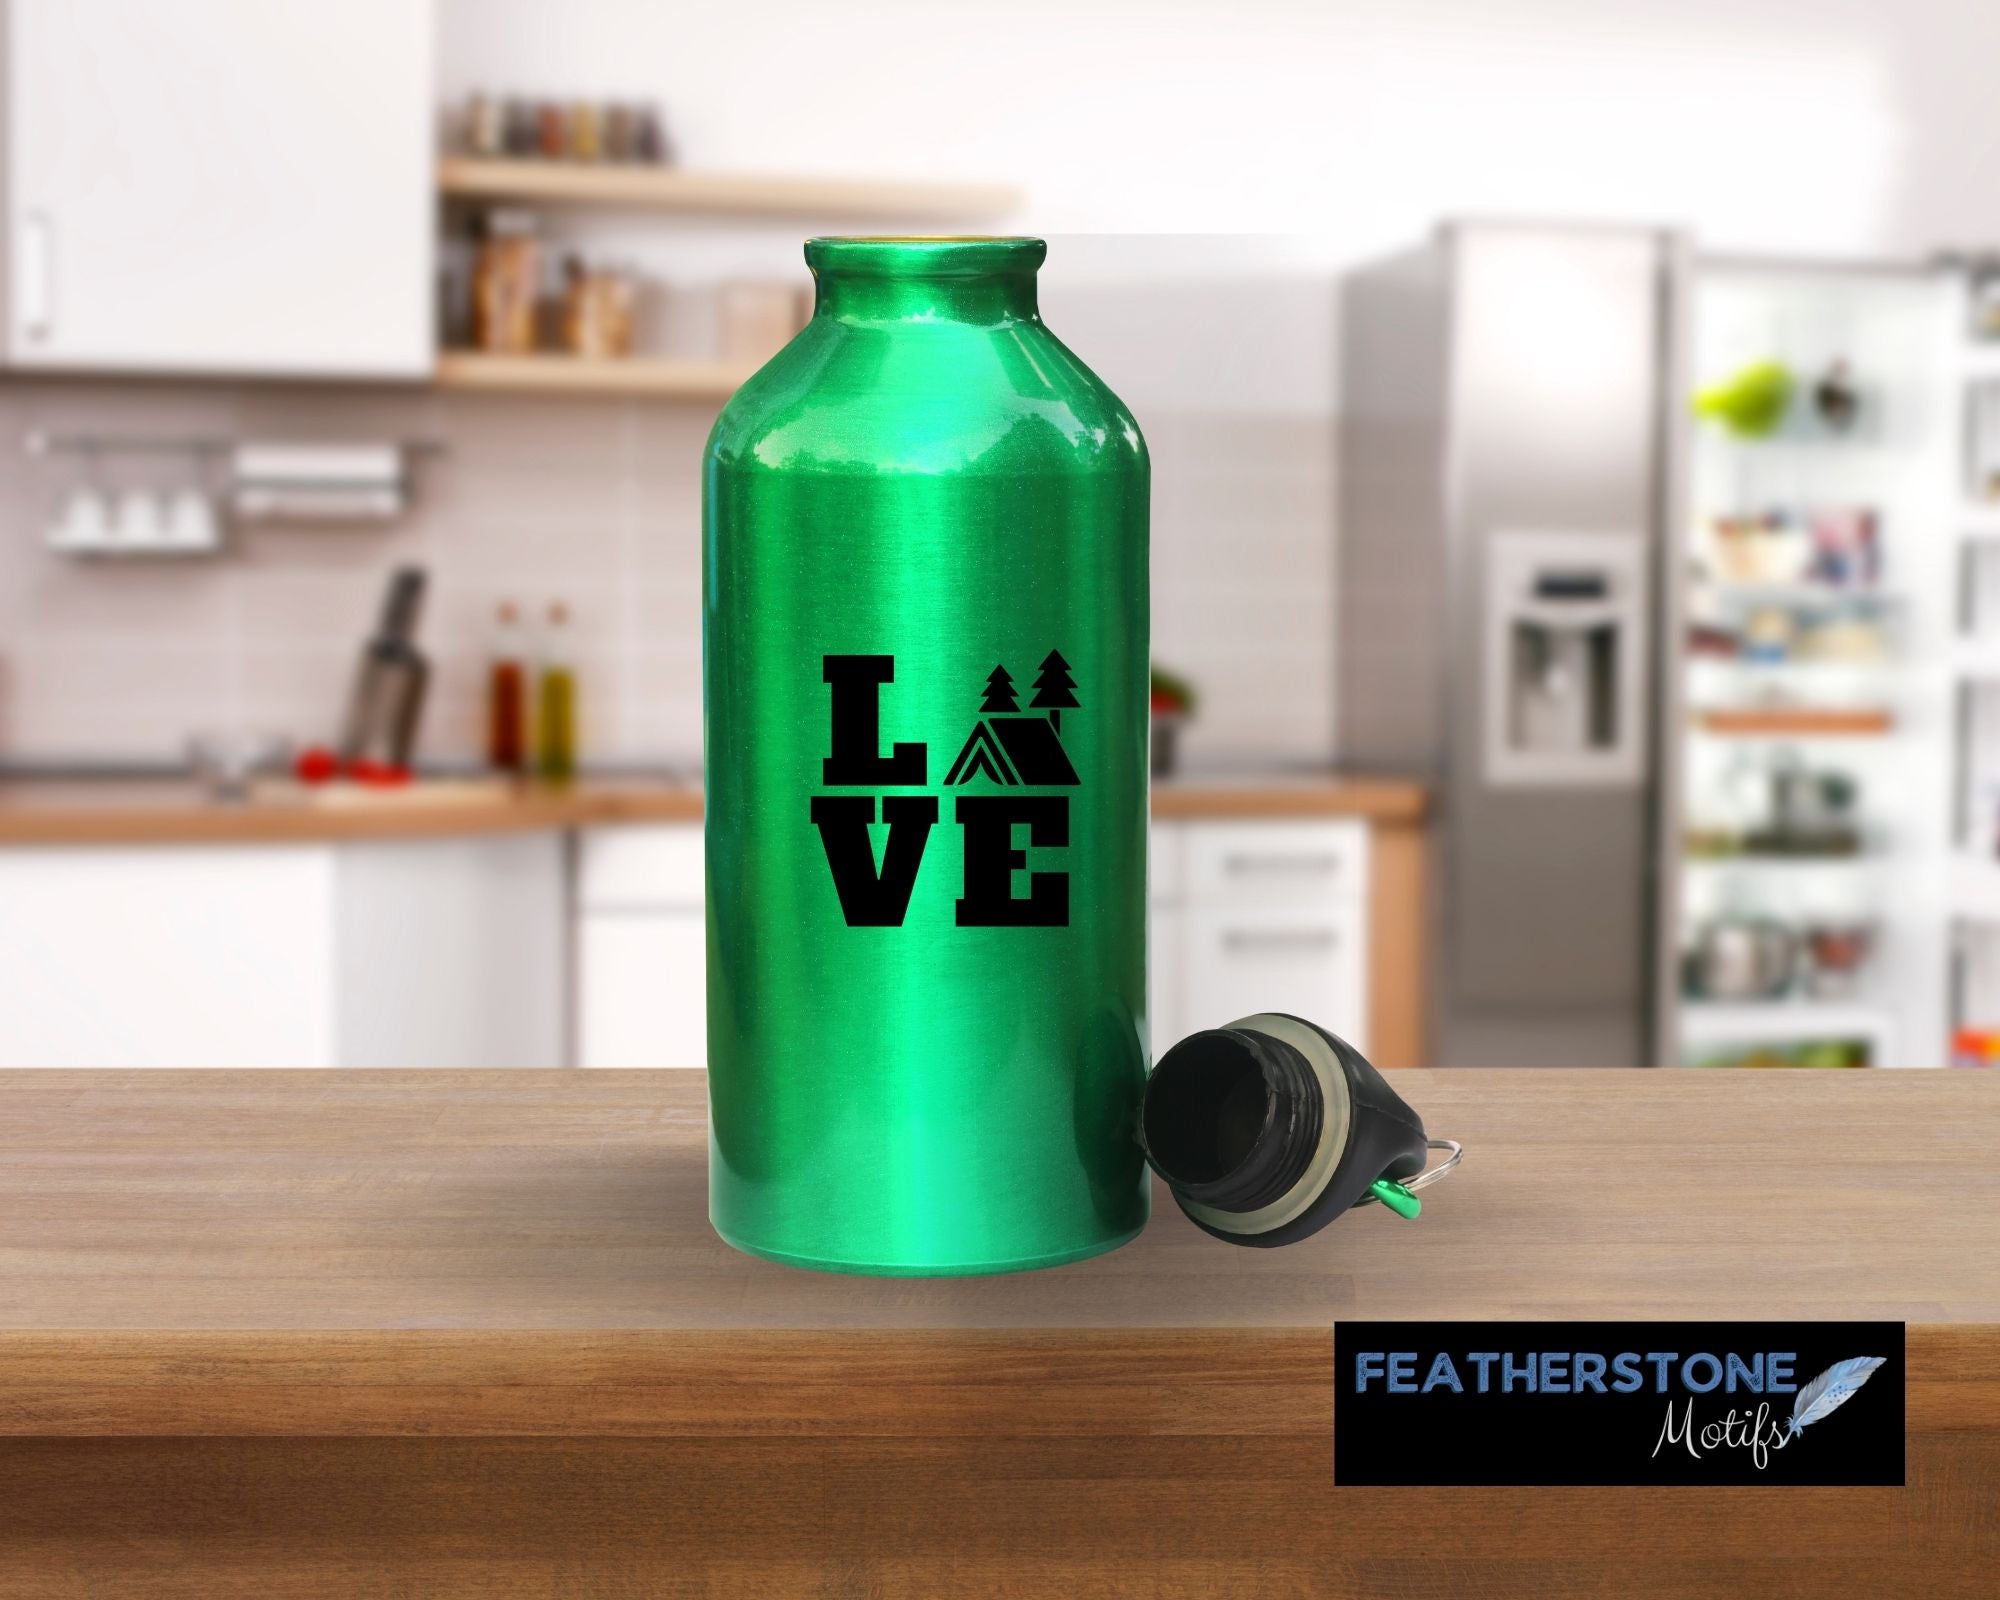 Love camping? Then show it with this camping themed love square vinyl decal! Available in 4 sizes and 10 colors, these vinyl decals make great gifts for everyone. This image shows the Camping Love Square vinyl decal on a water bottle.